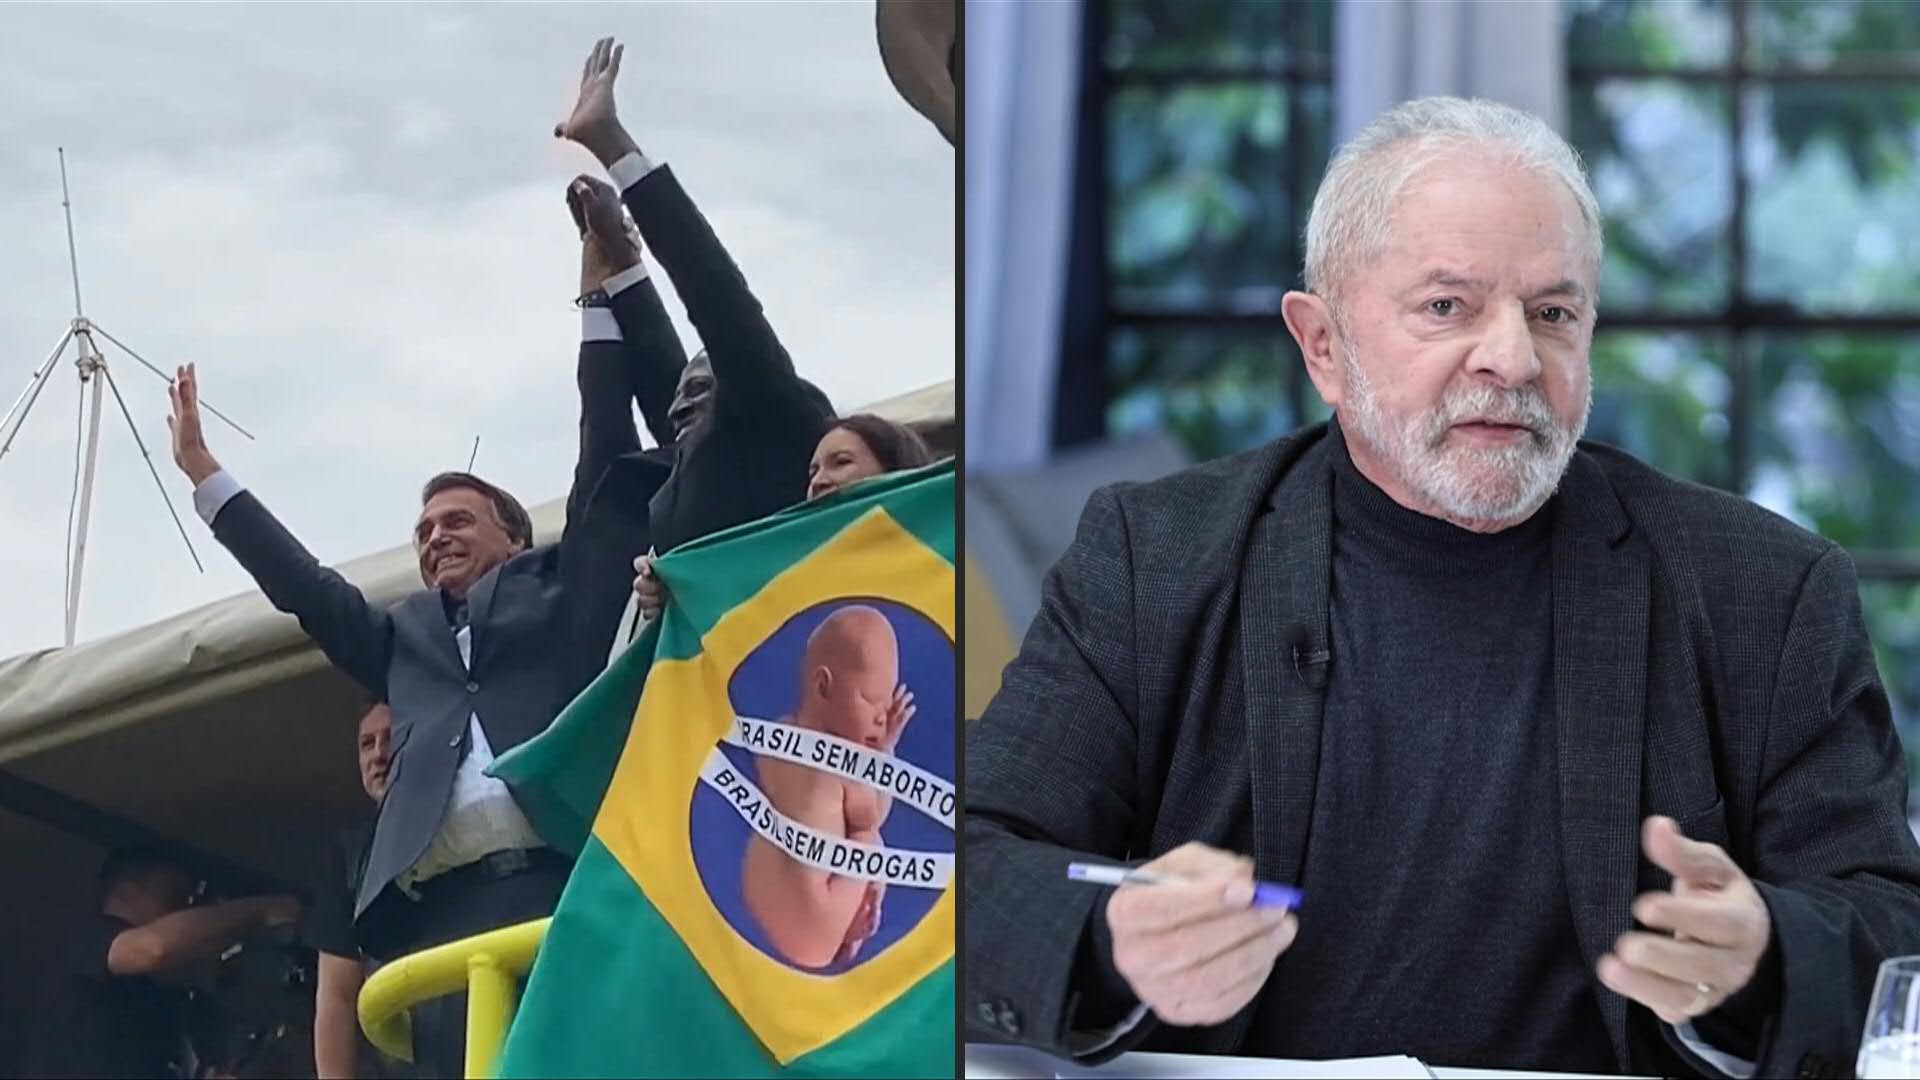 The OAS sent its electoral mission to Brazil to monitor the October 2nd elections